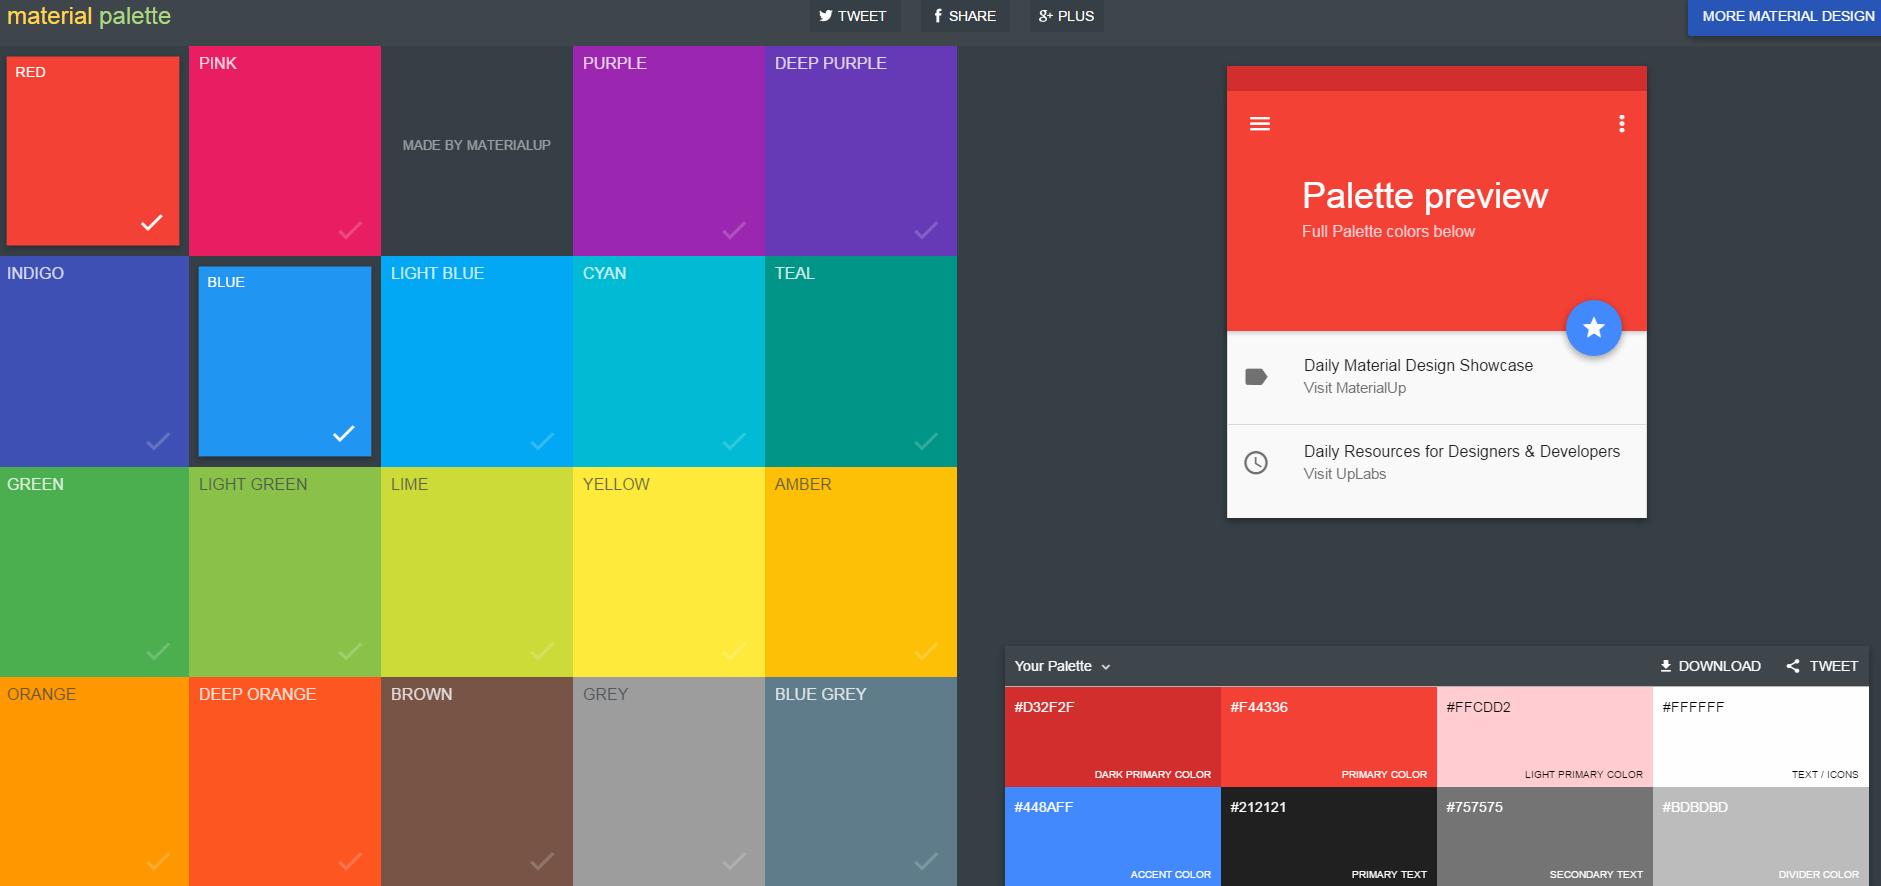 Material palette